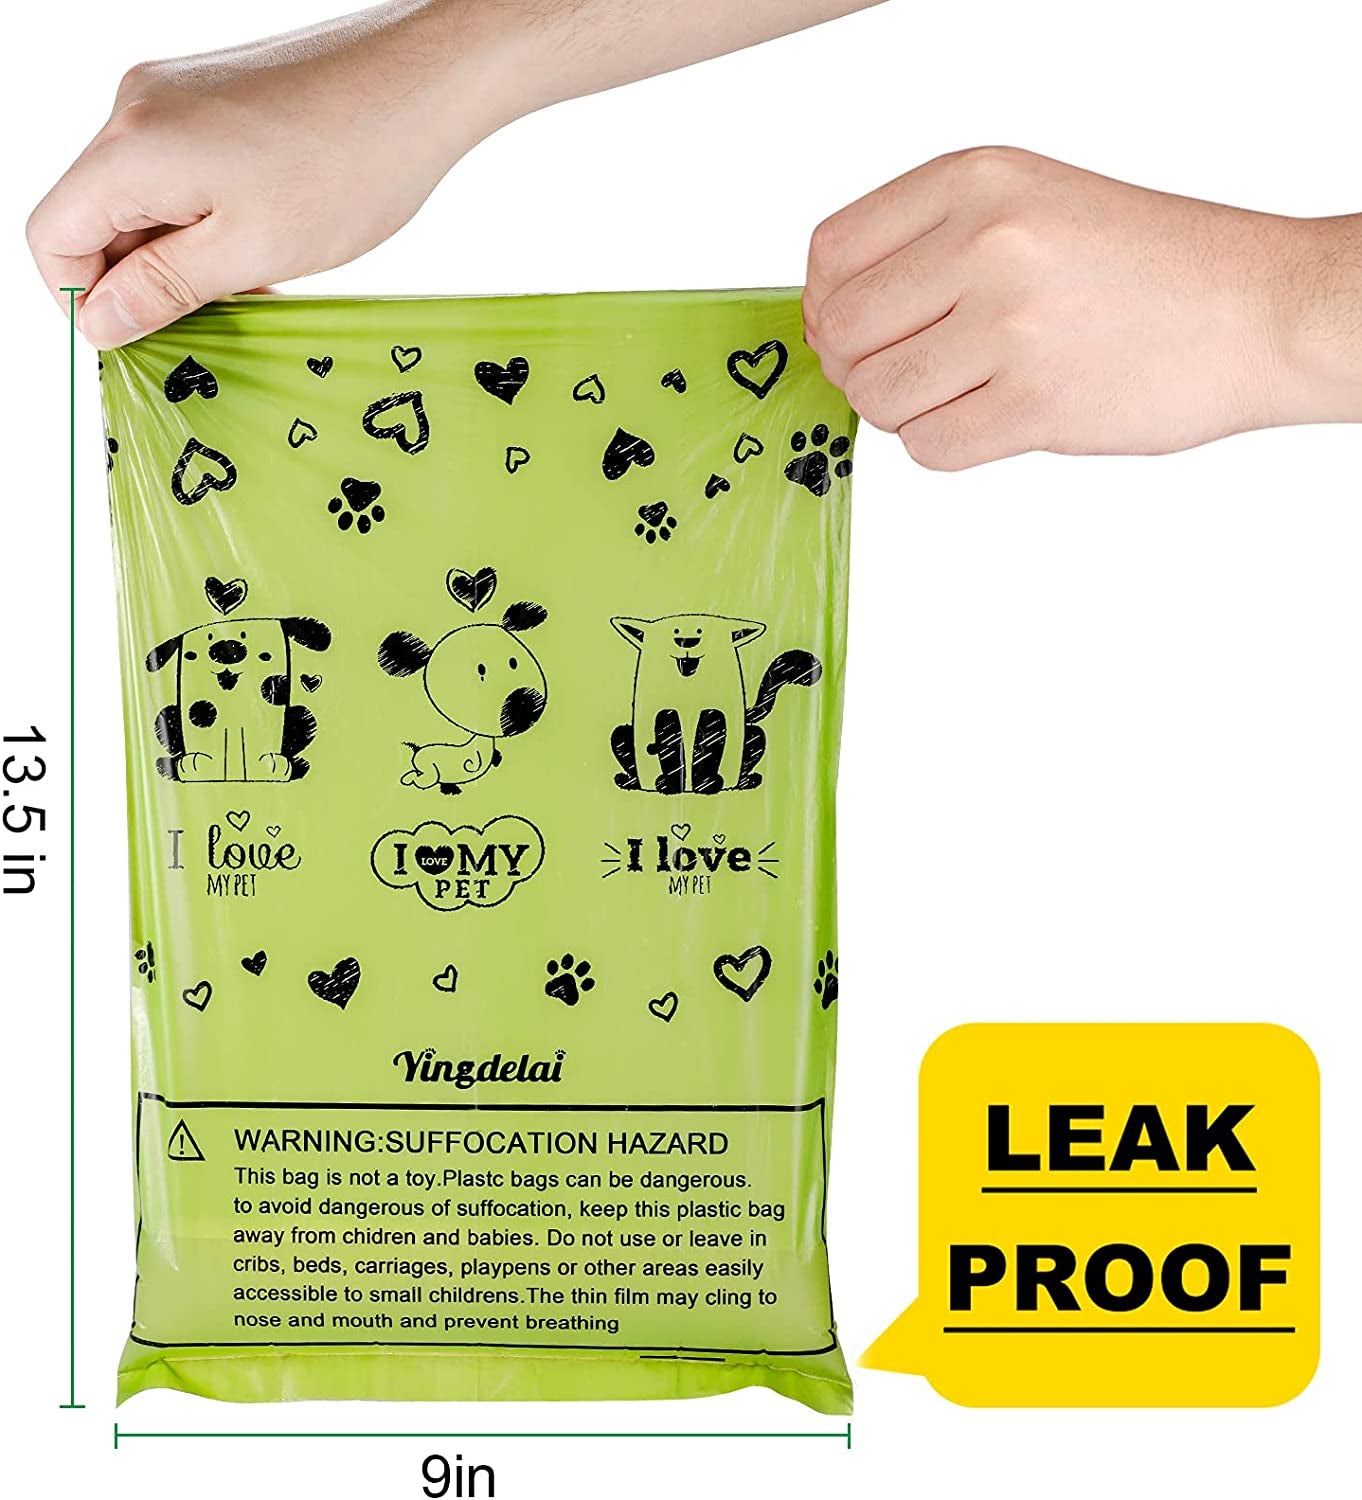 Dog Poop Bag, Biodegradable - 540 Count Dog Waste Bags with Dispenser, Extra Thick Strong Leak Proof Doggy Poop Bags| Scented